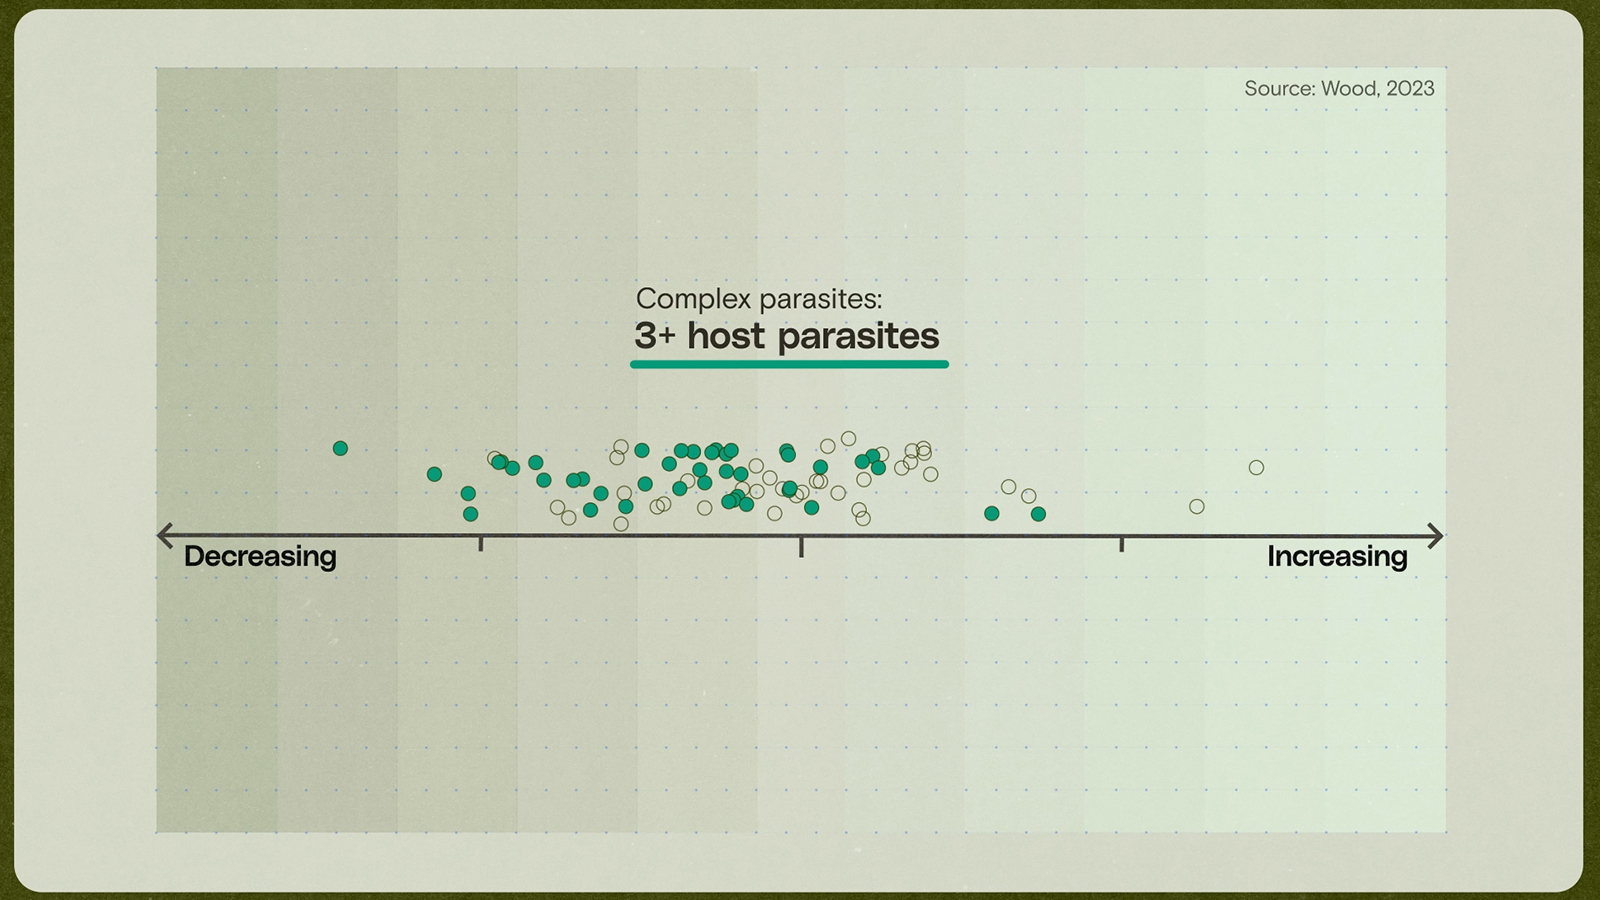 A graph shows the trends of Chelsea Wood's 2023 study on parasite changes over the past century. The horizontal axis shows whether different parasite species are increasing or decreasing. Parasites with three or more hosts are mostly decreasing.